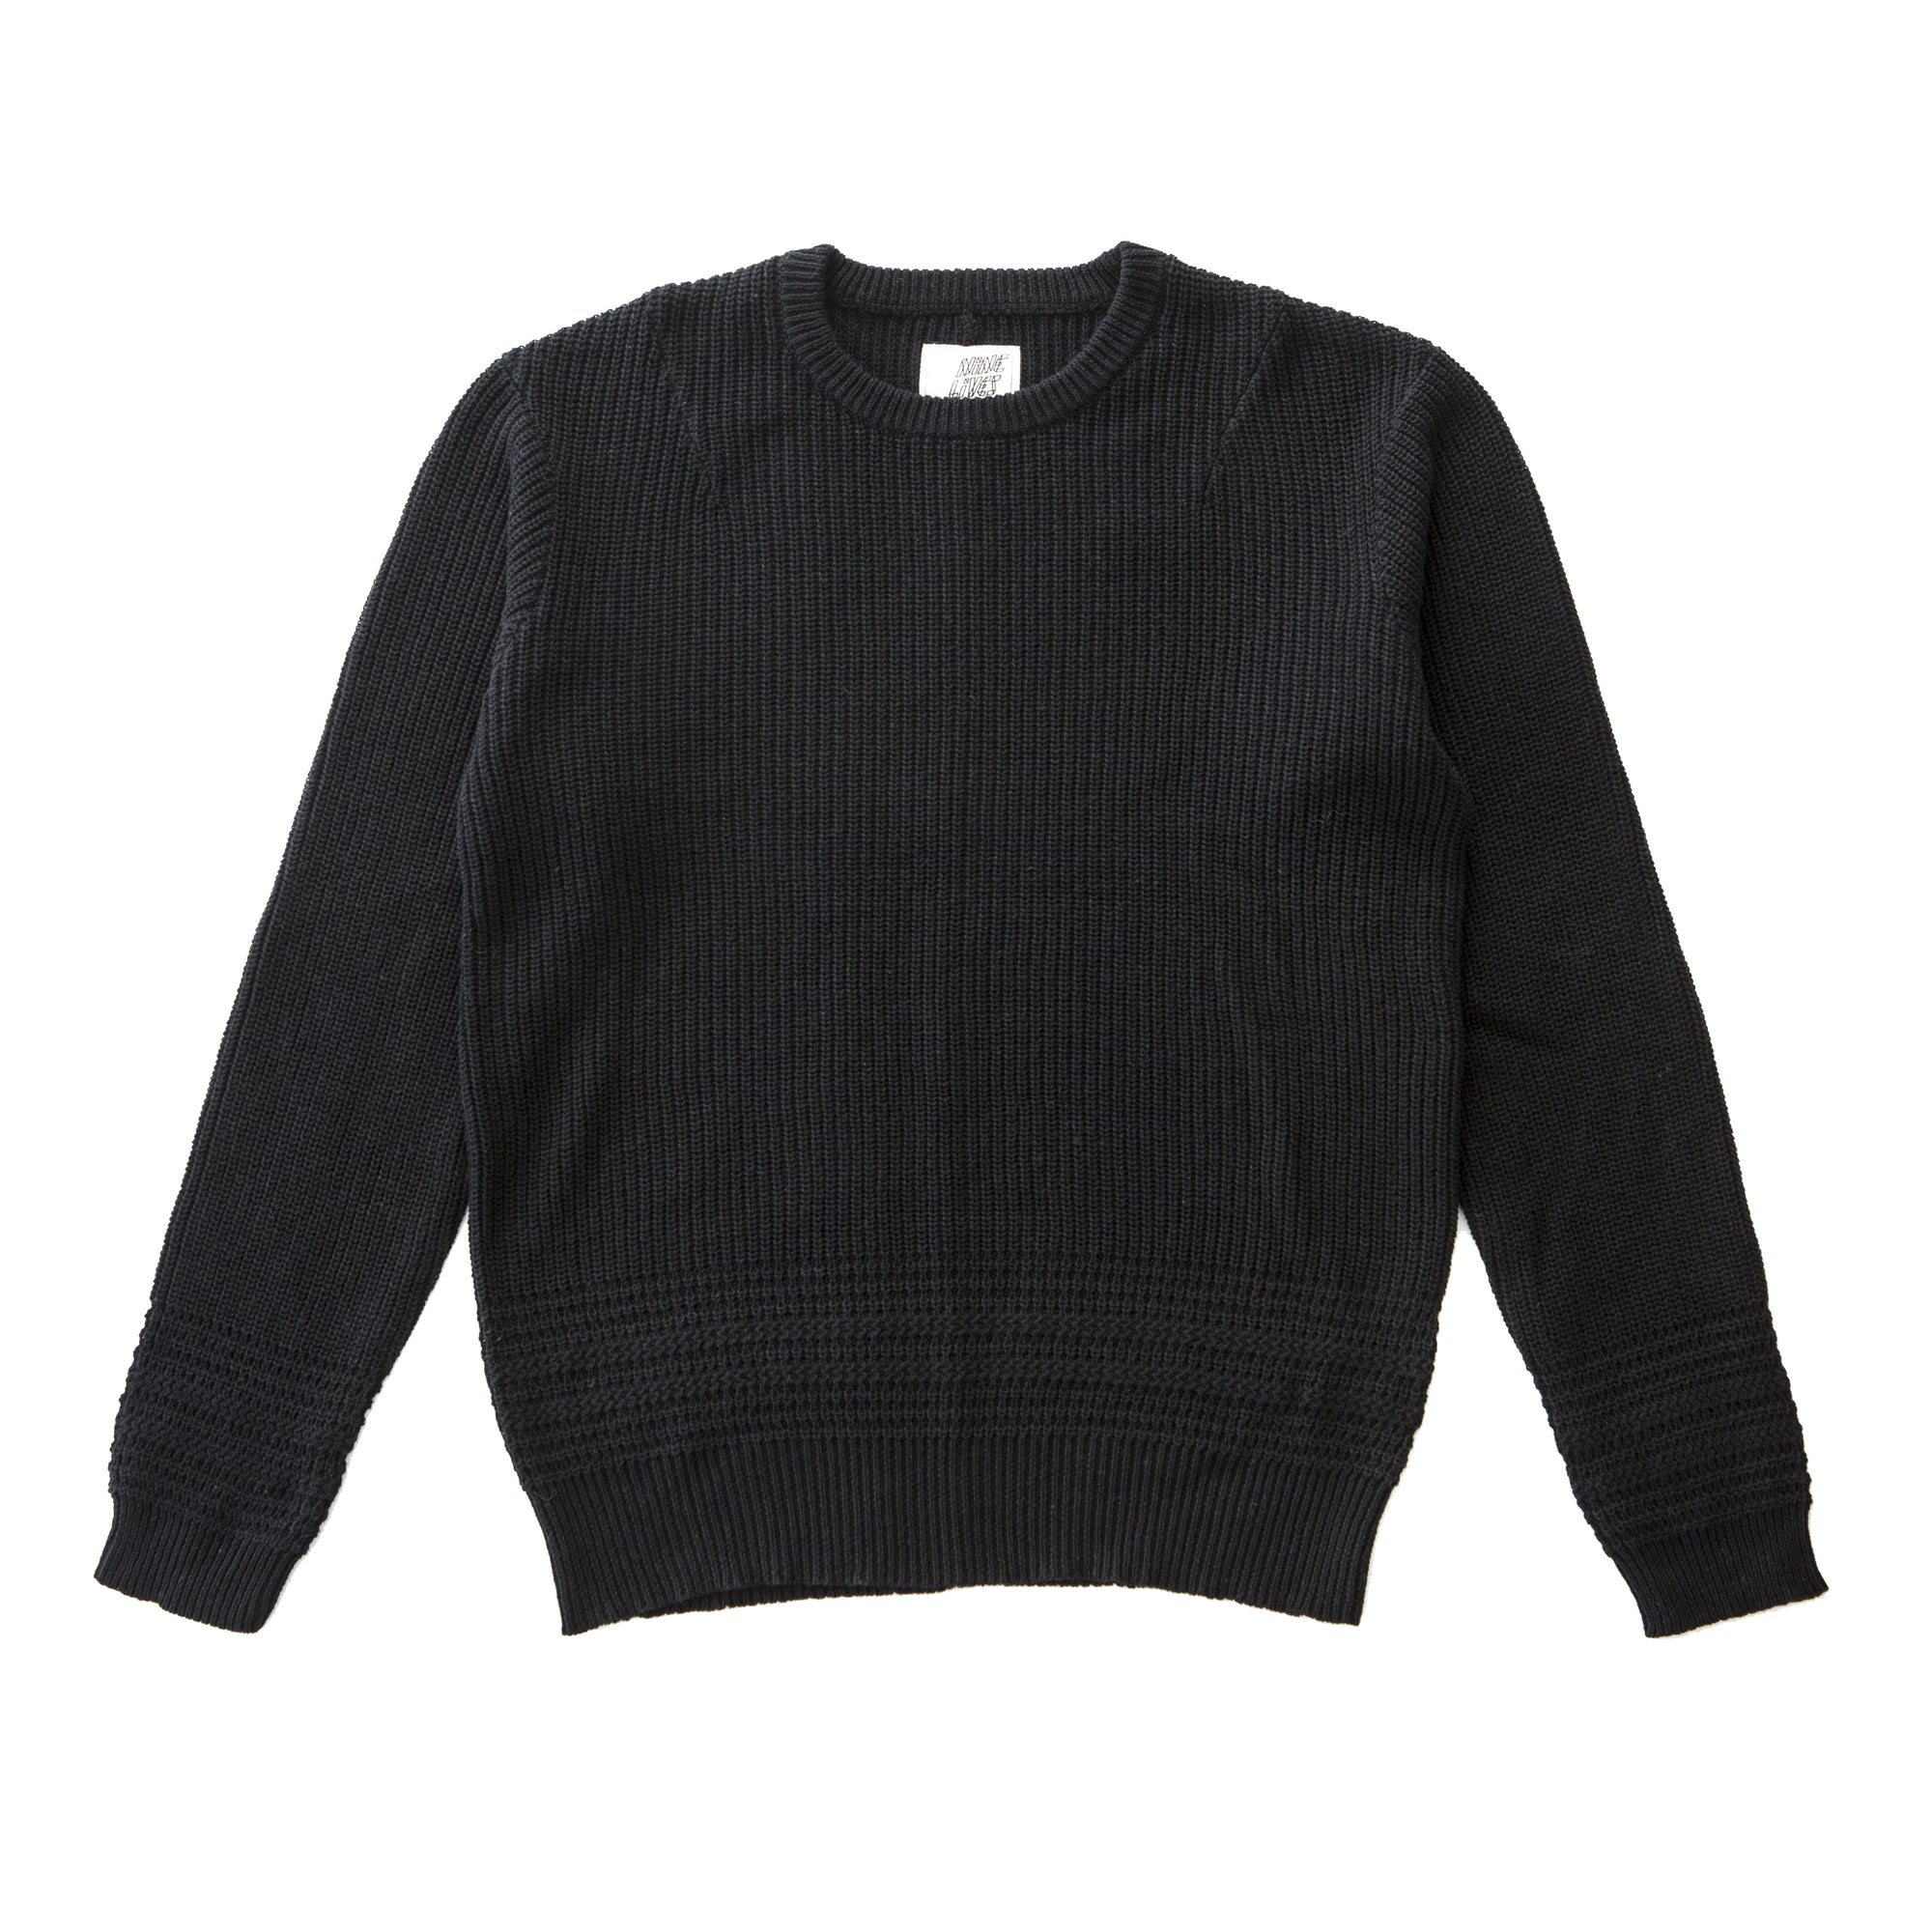 "Clarence Bay" Cotton/Cashmere Sweater